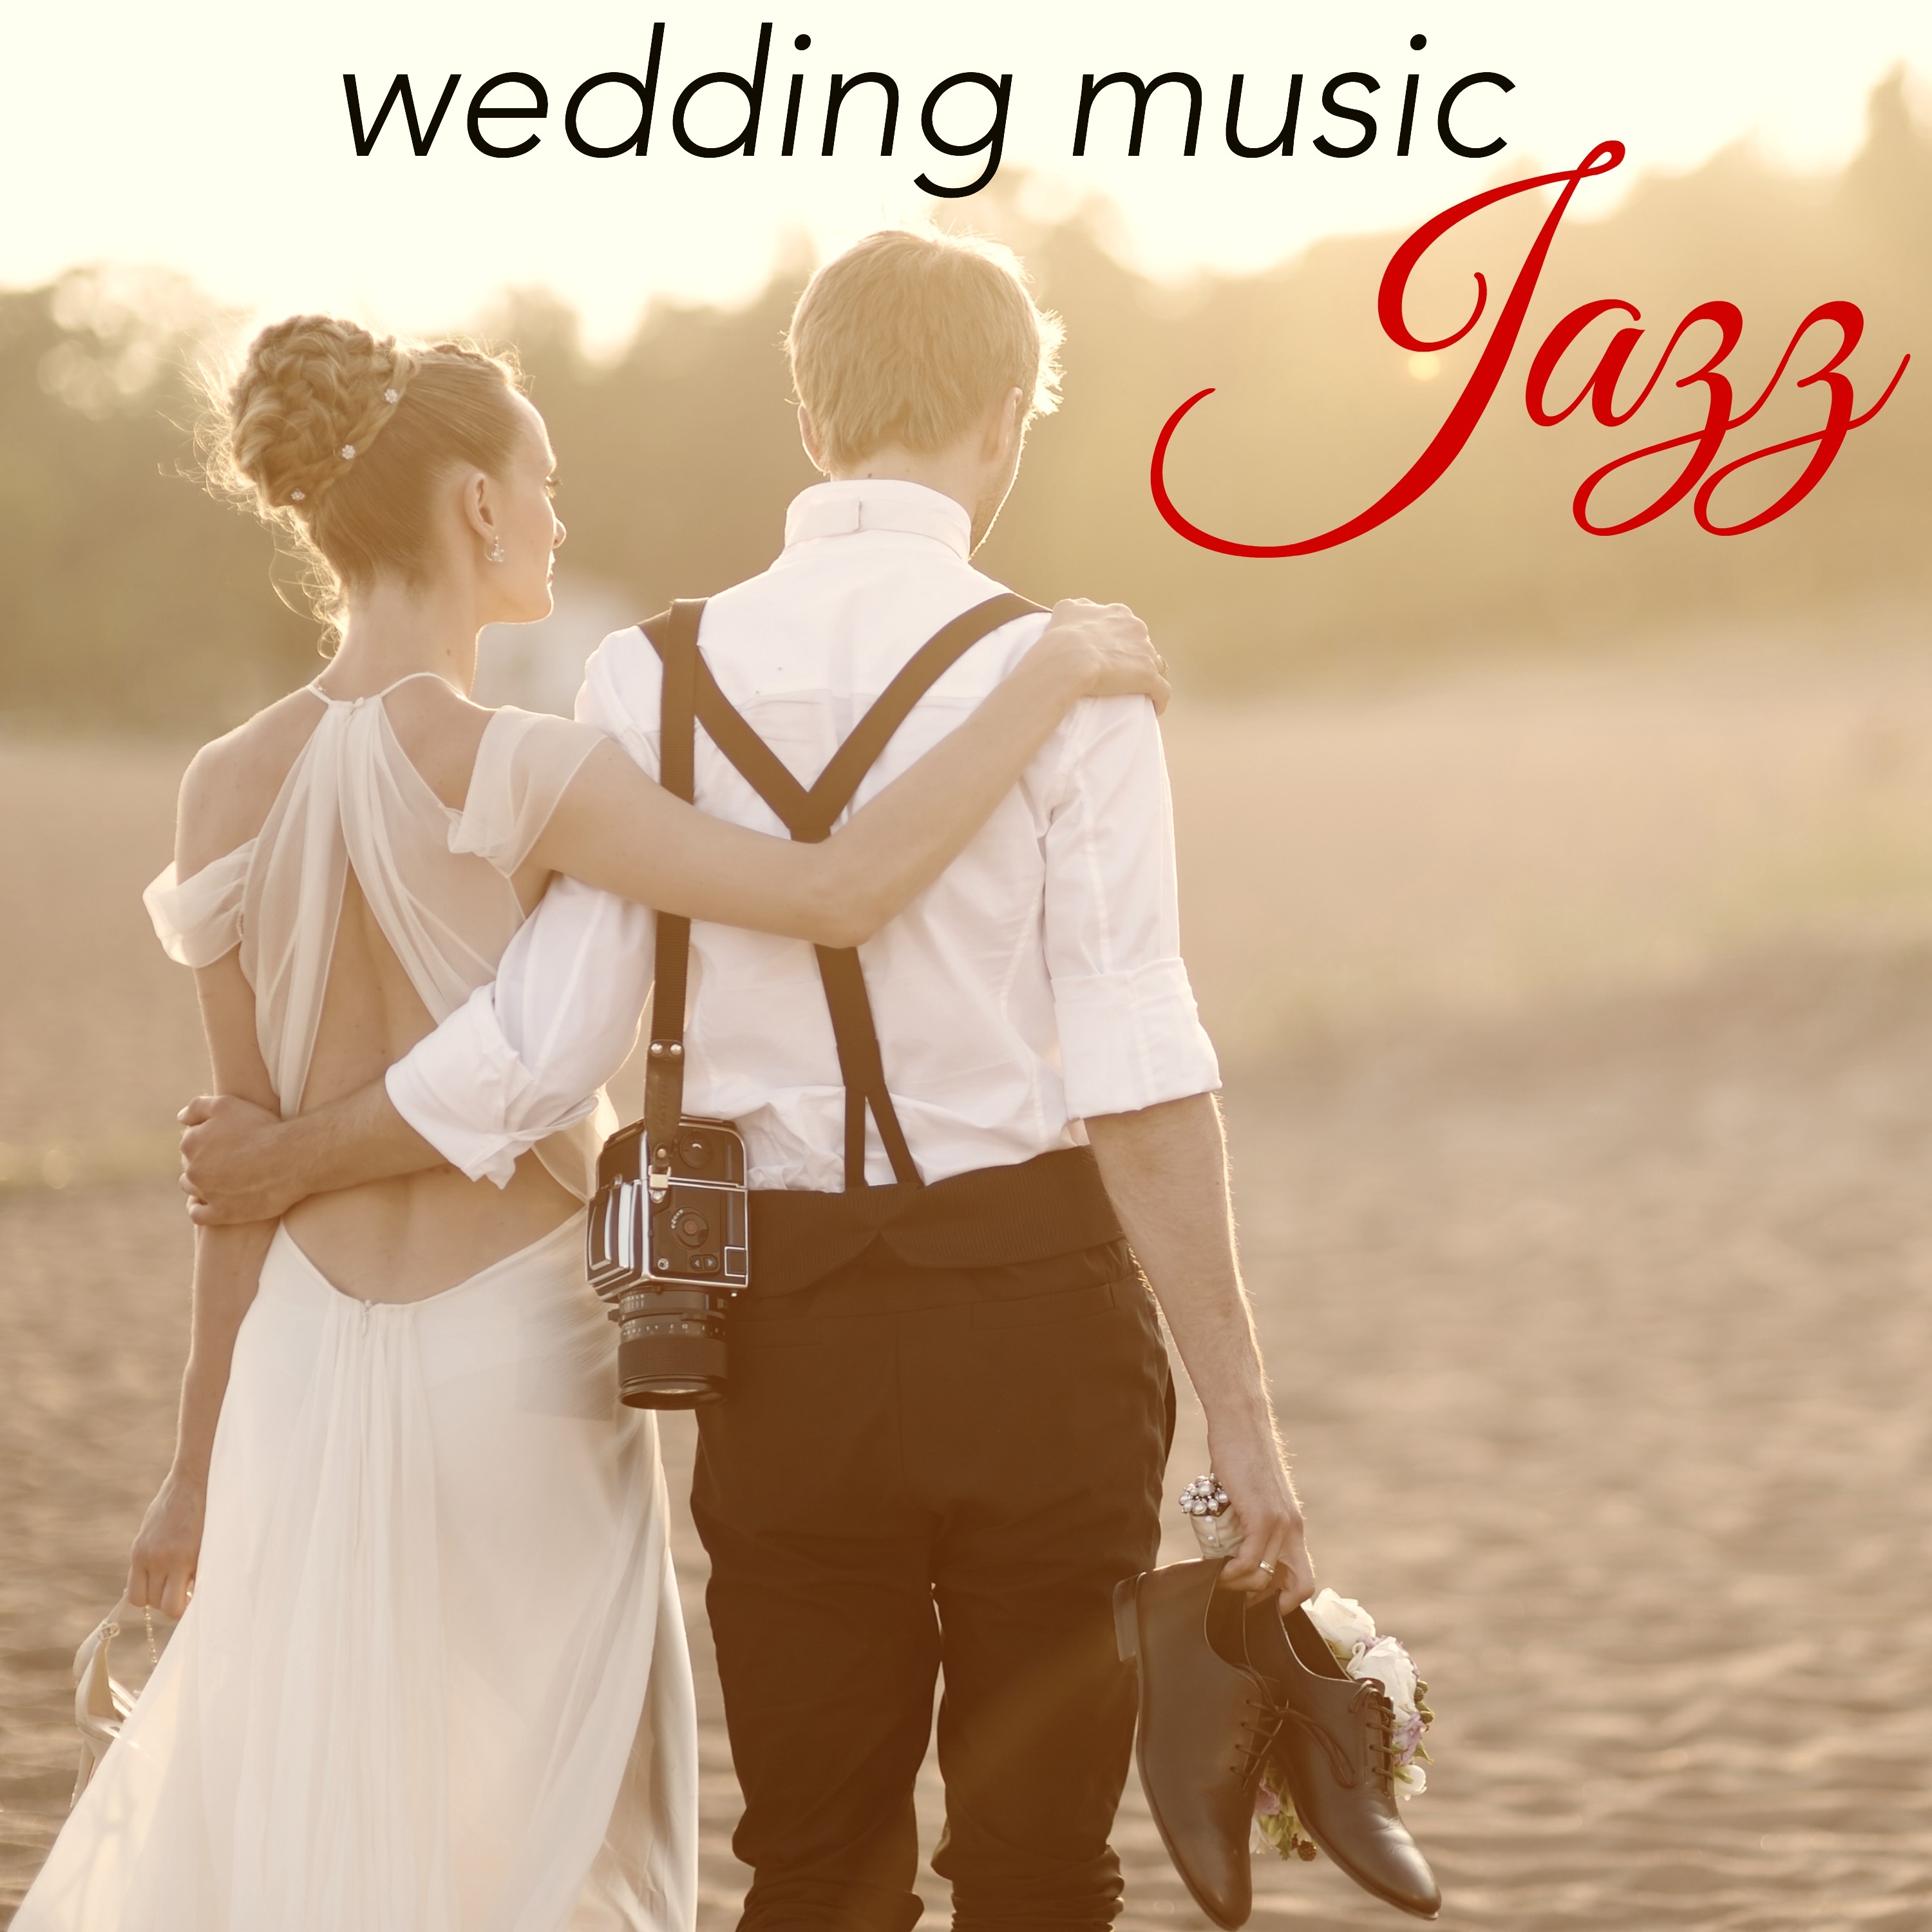 Jazz Wedding Music  Smooth Jazz  Soft Chill Out Music for Wedding Parties